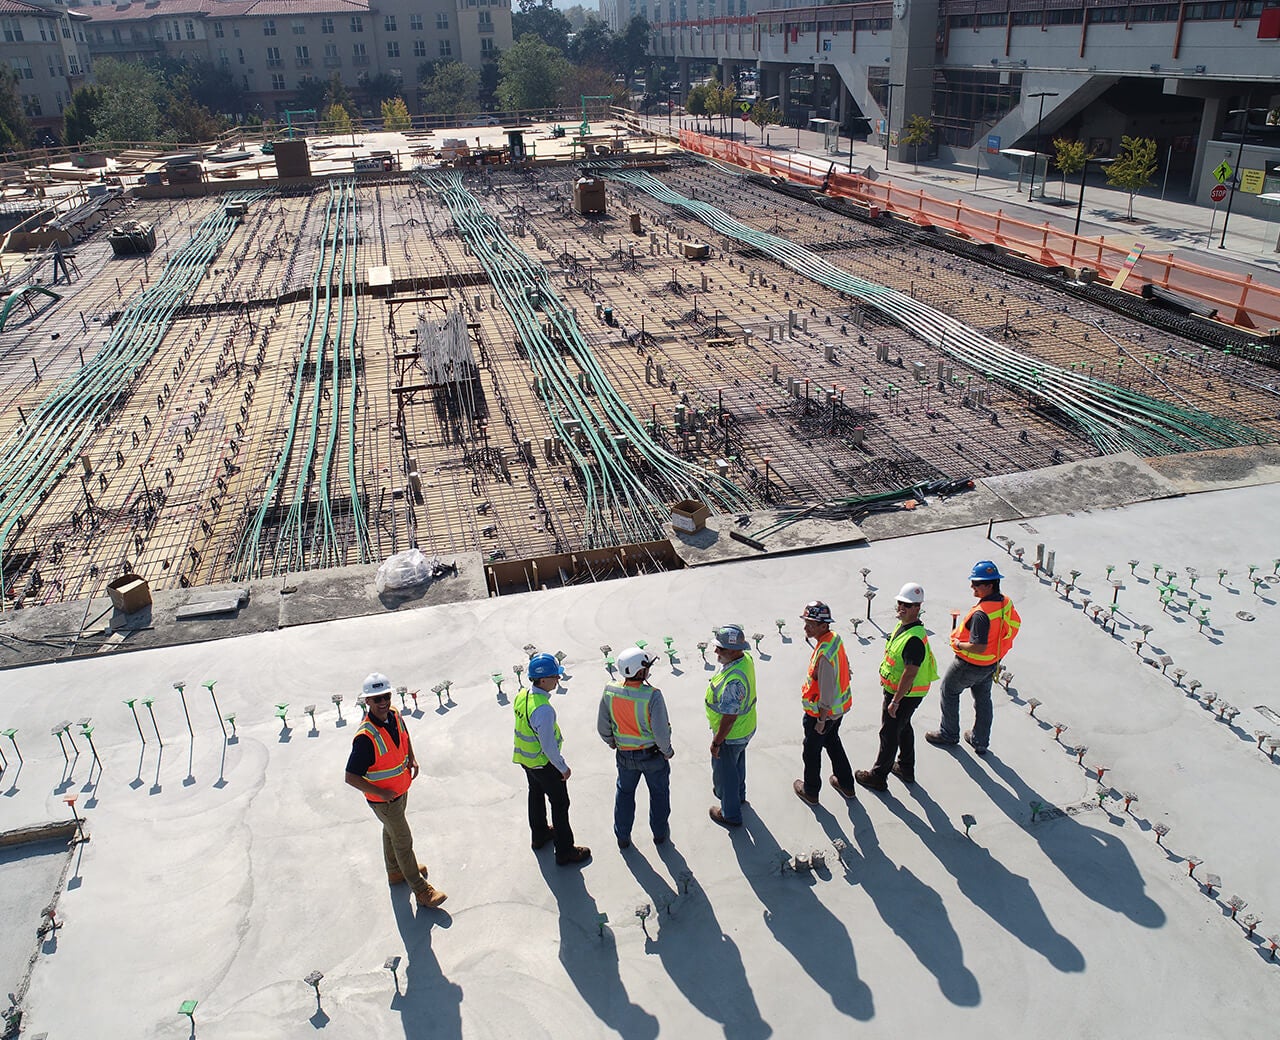 Outdoor photo of a large construction site with 7 OHL workers in the foreground